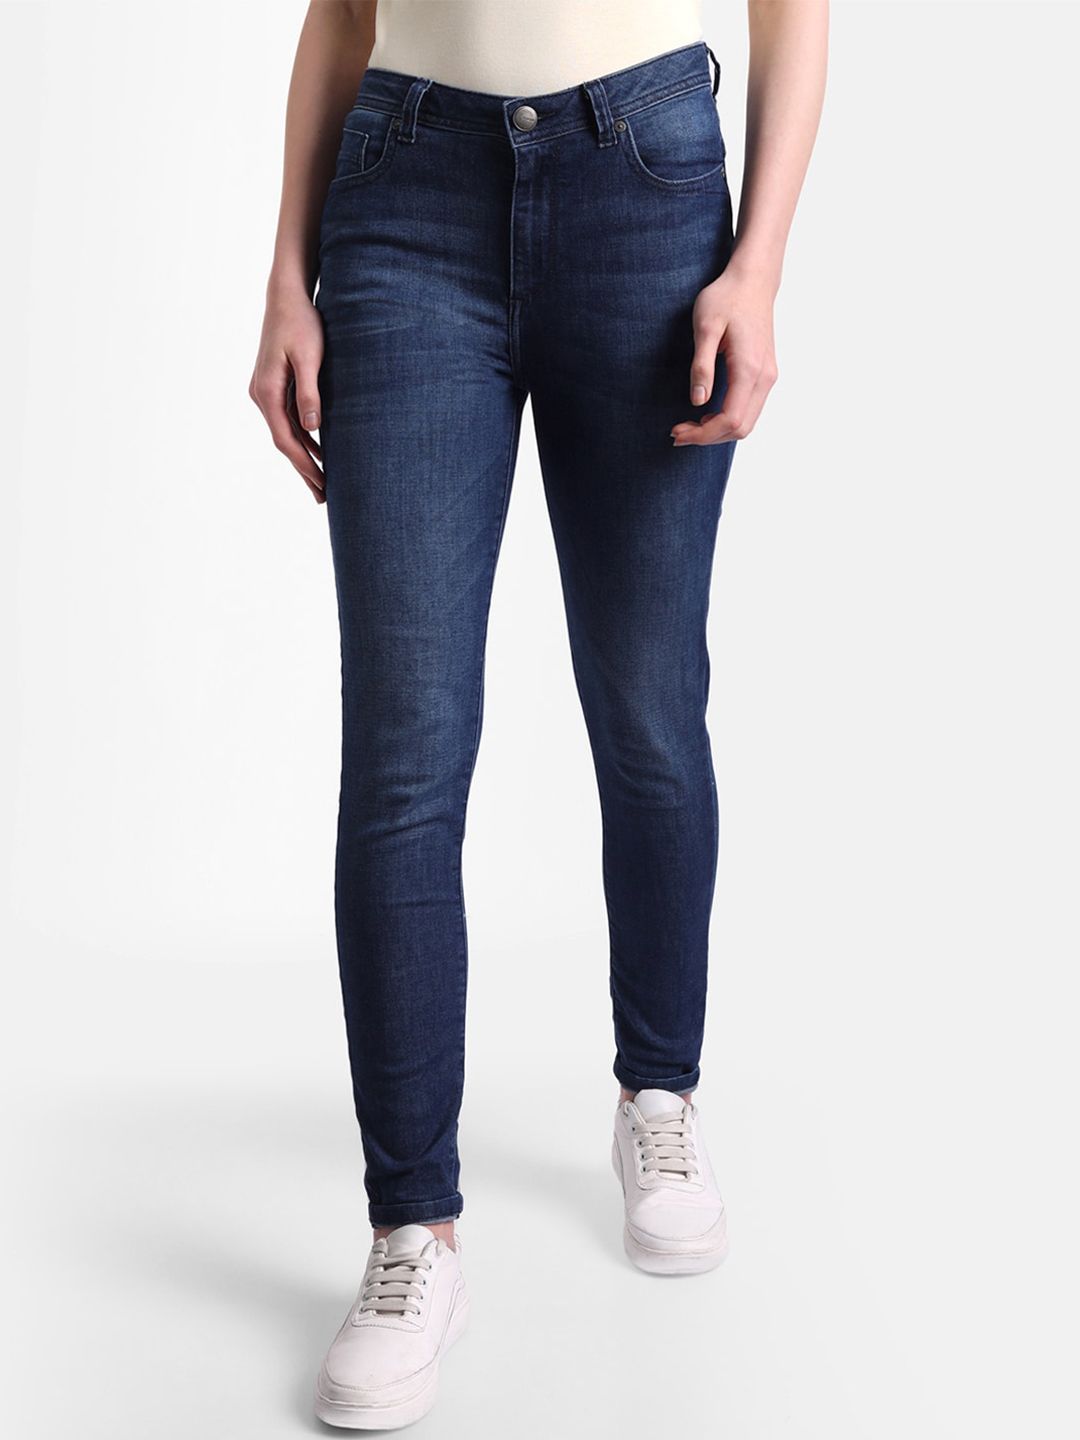 United Colors of Benetton Women Navy Blue Skinny Fit Light Fade Jeans Price in India